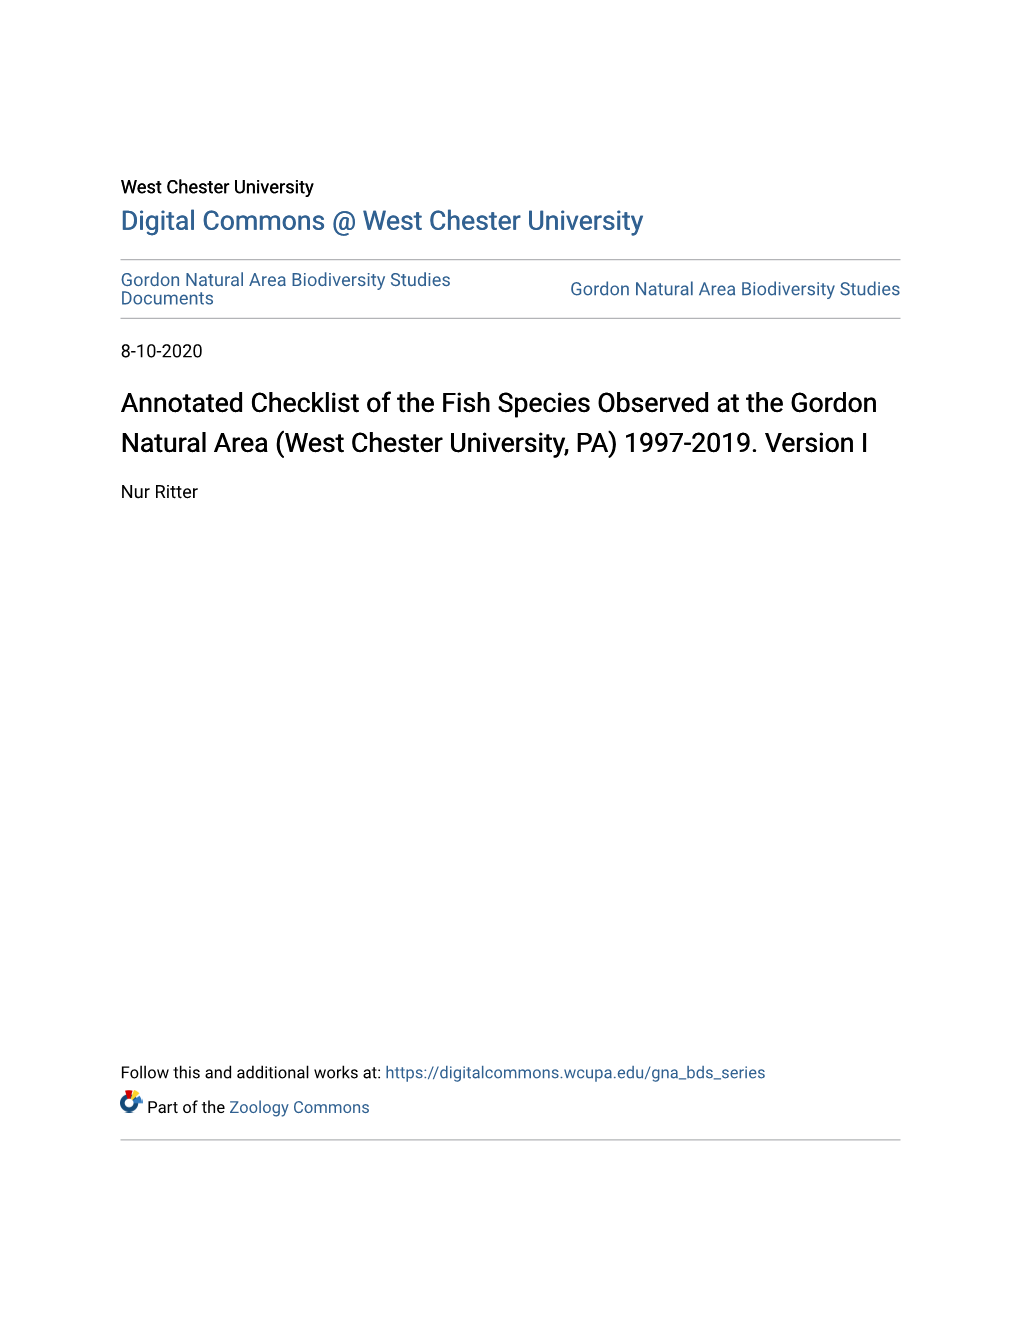 Annotated Checklist of the Fish Species Observed at the Gordon Natural Area (West Chester University, PA) 1997-2019